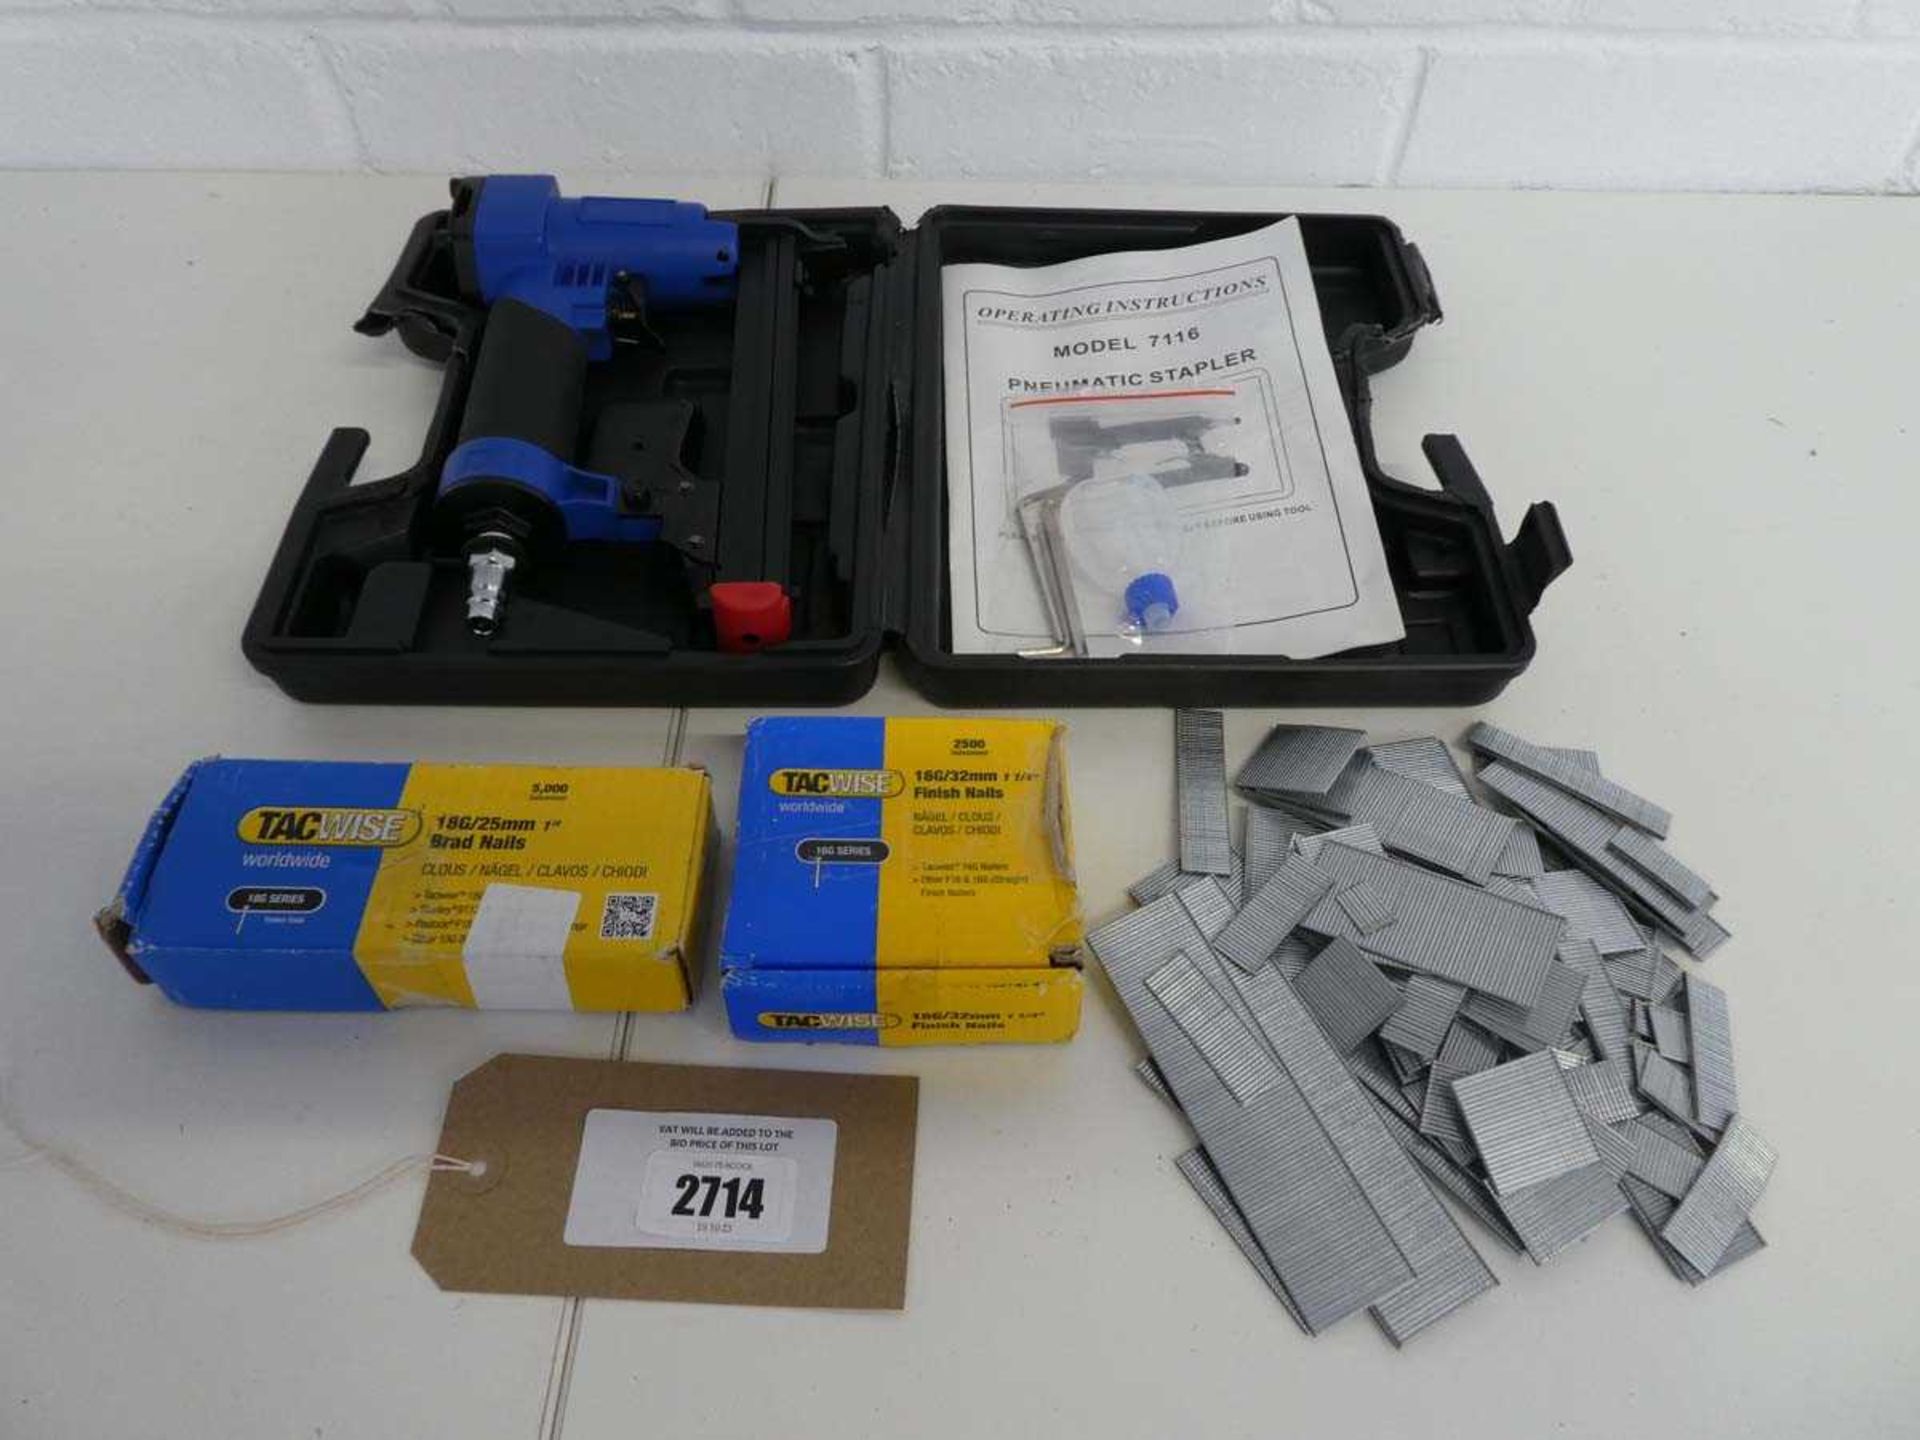 +VAT Cased pneumatic stapler with quantity of loose staples, boxed pack of Tacwise 166/32mm finish